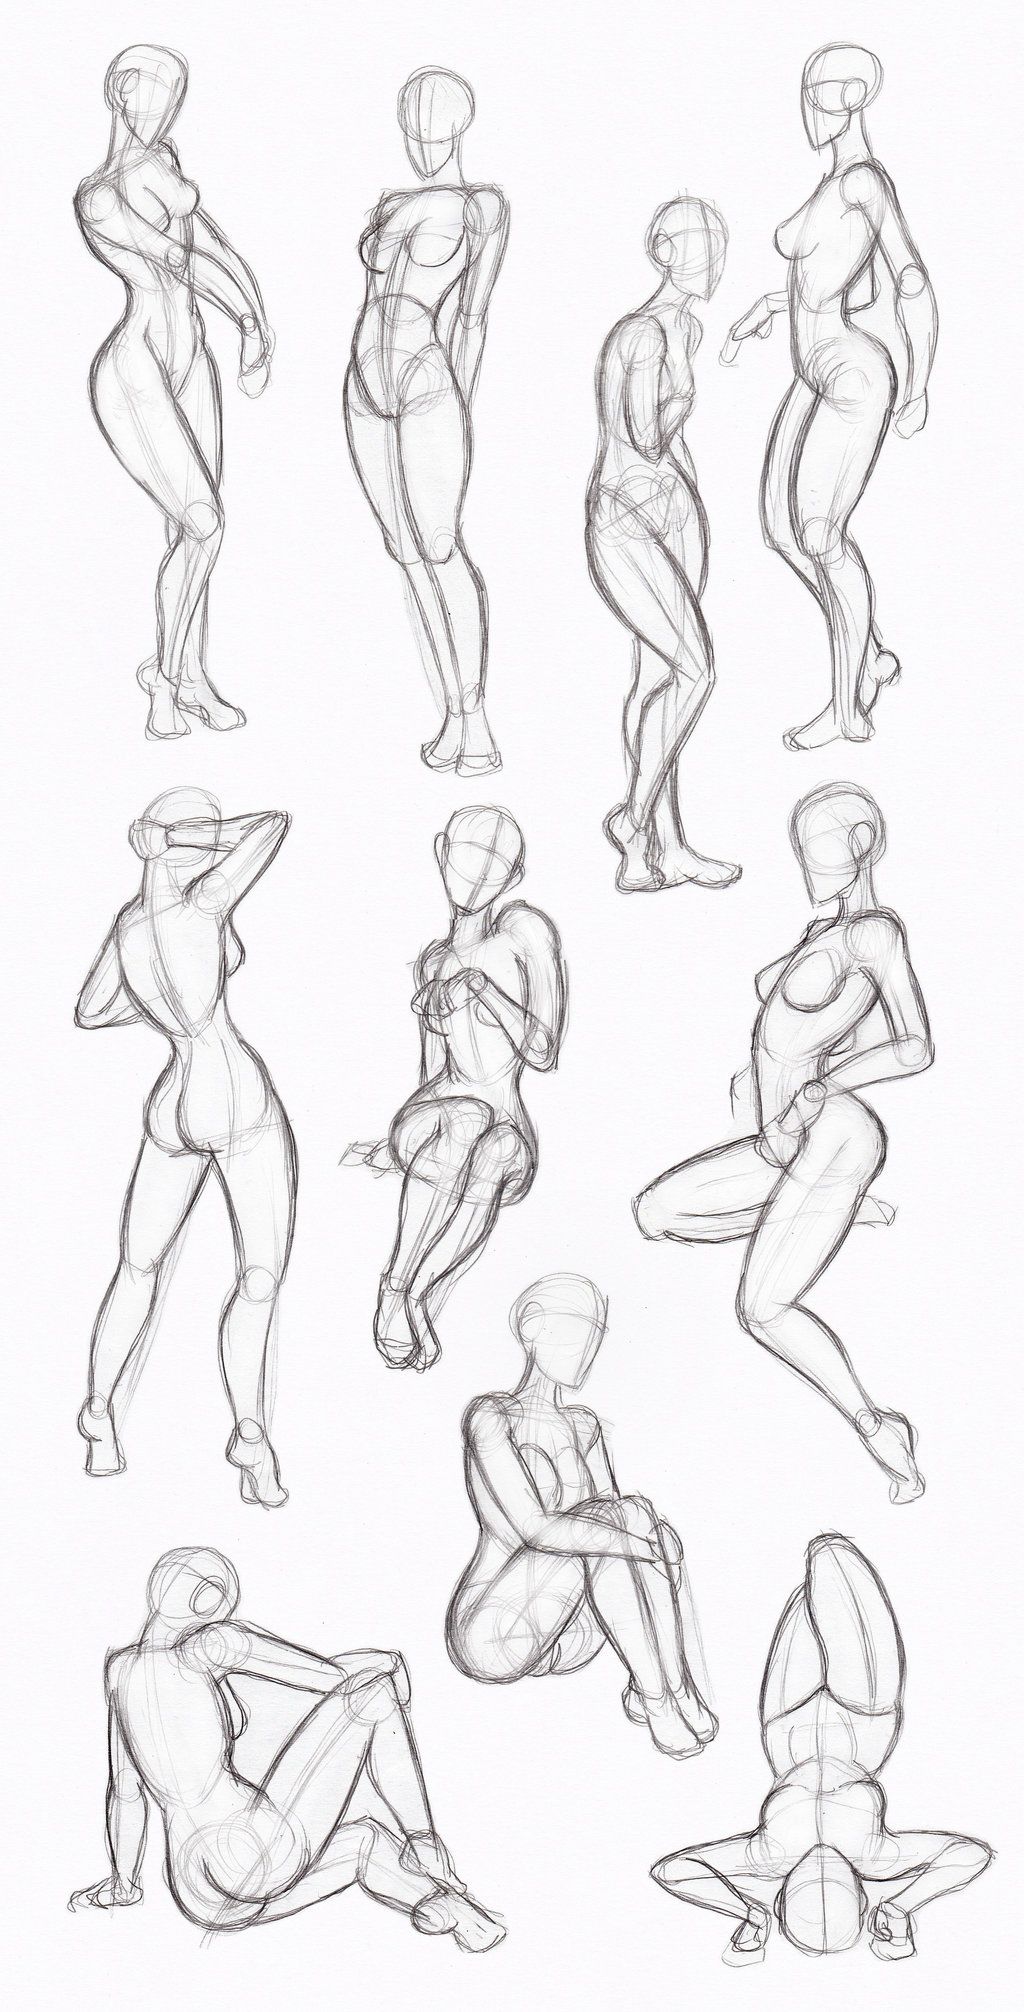 Woman Body Sketch / How to draw female body for Android - APK Download